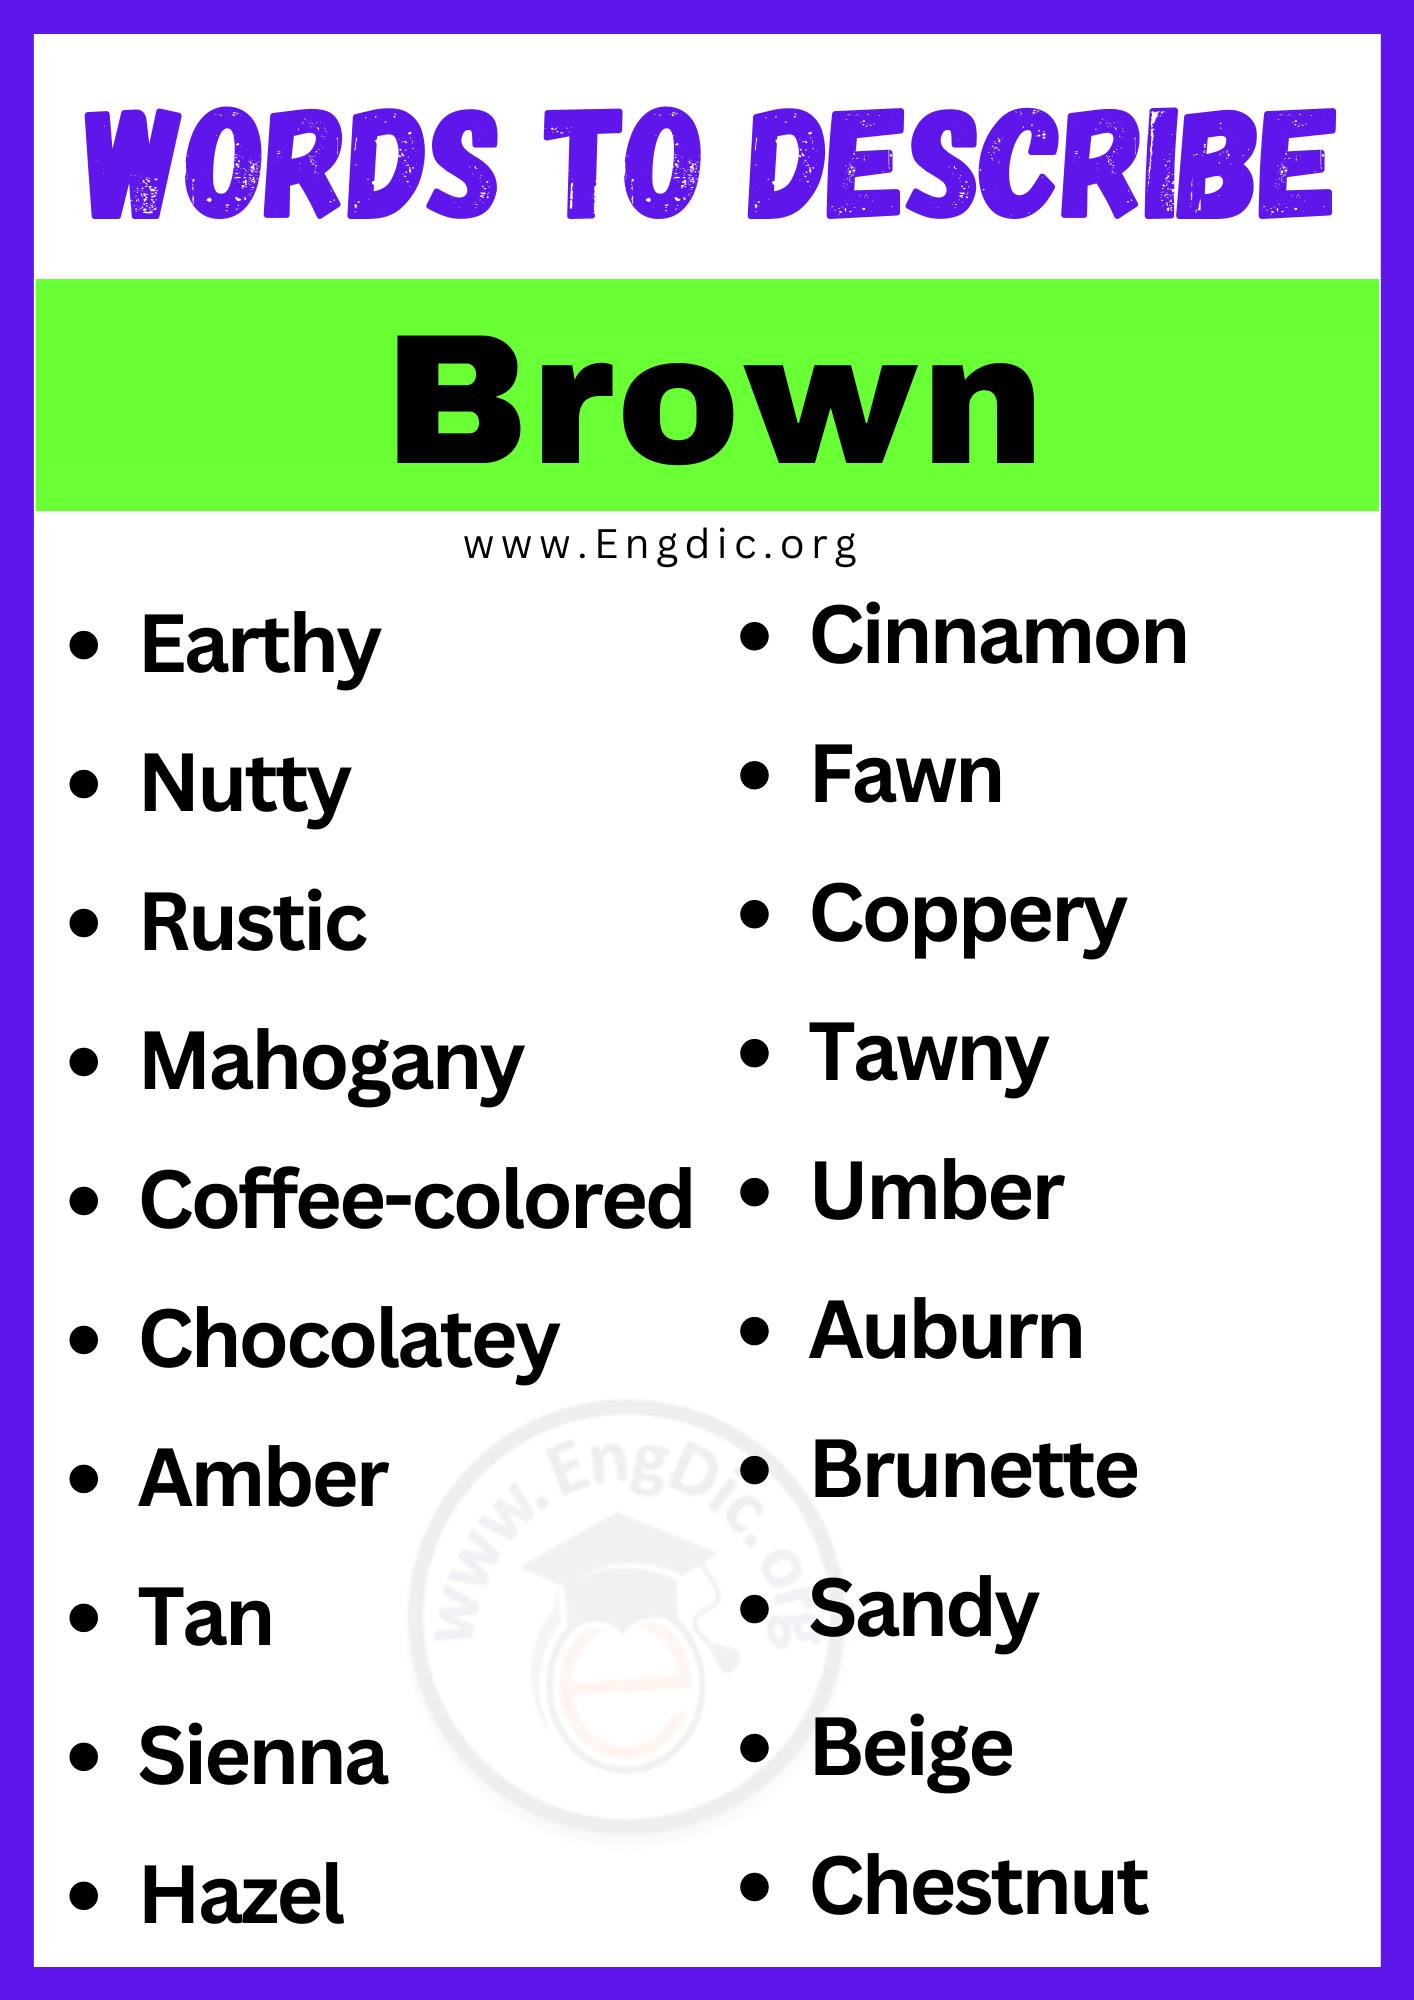 Words to Describe Brown